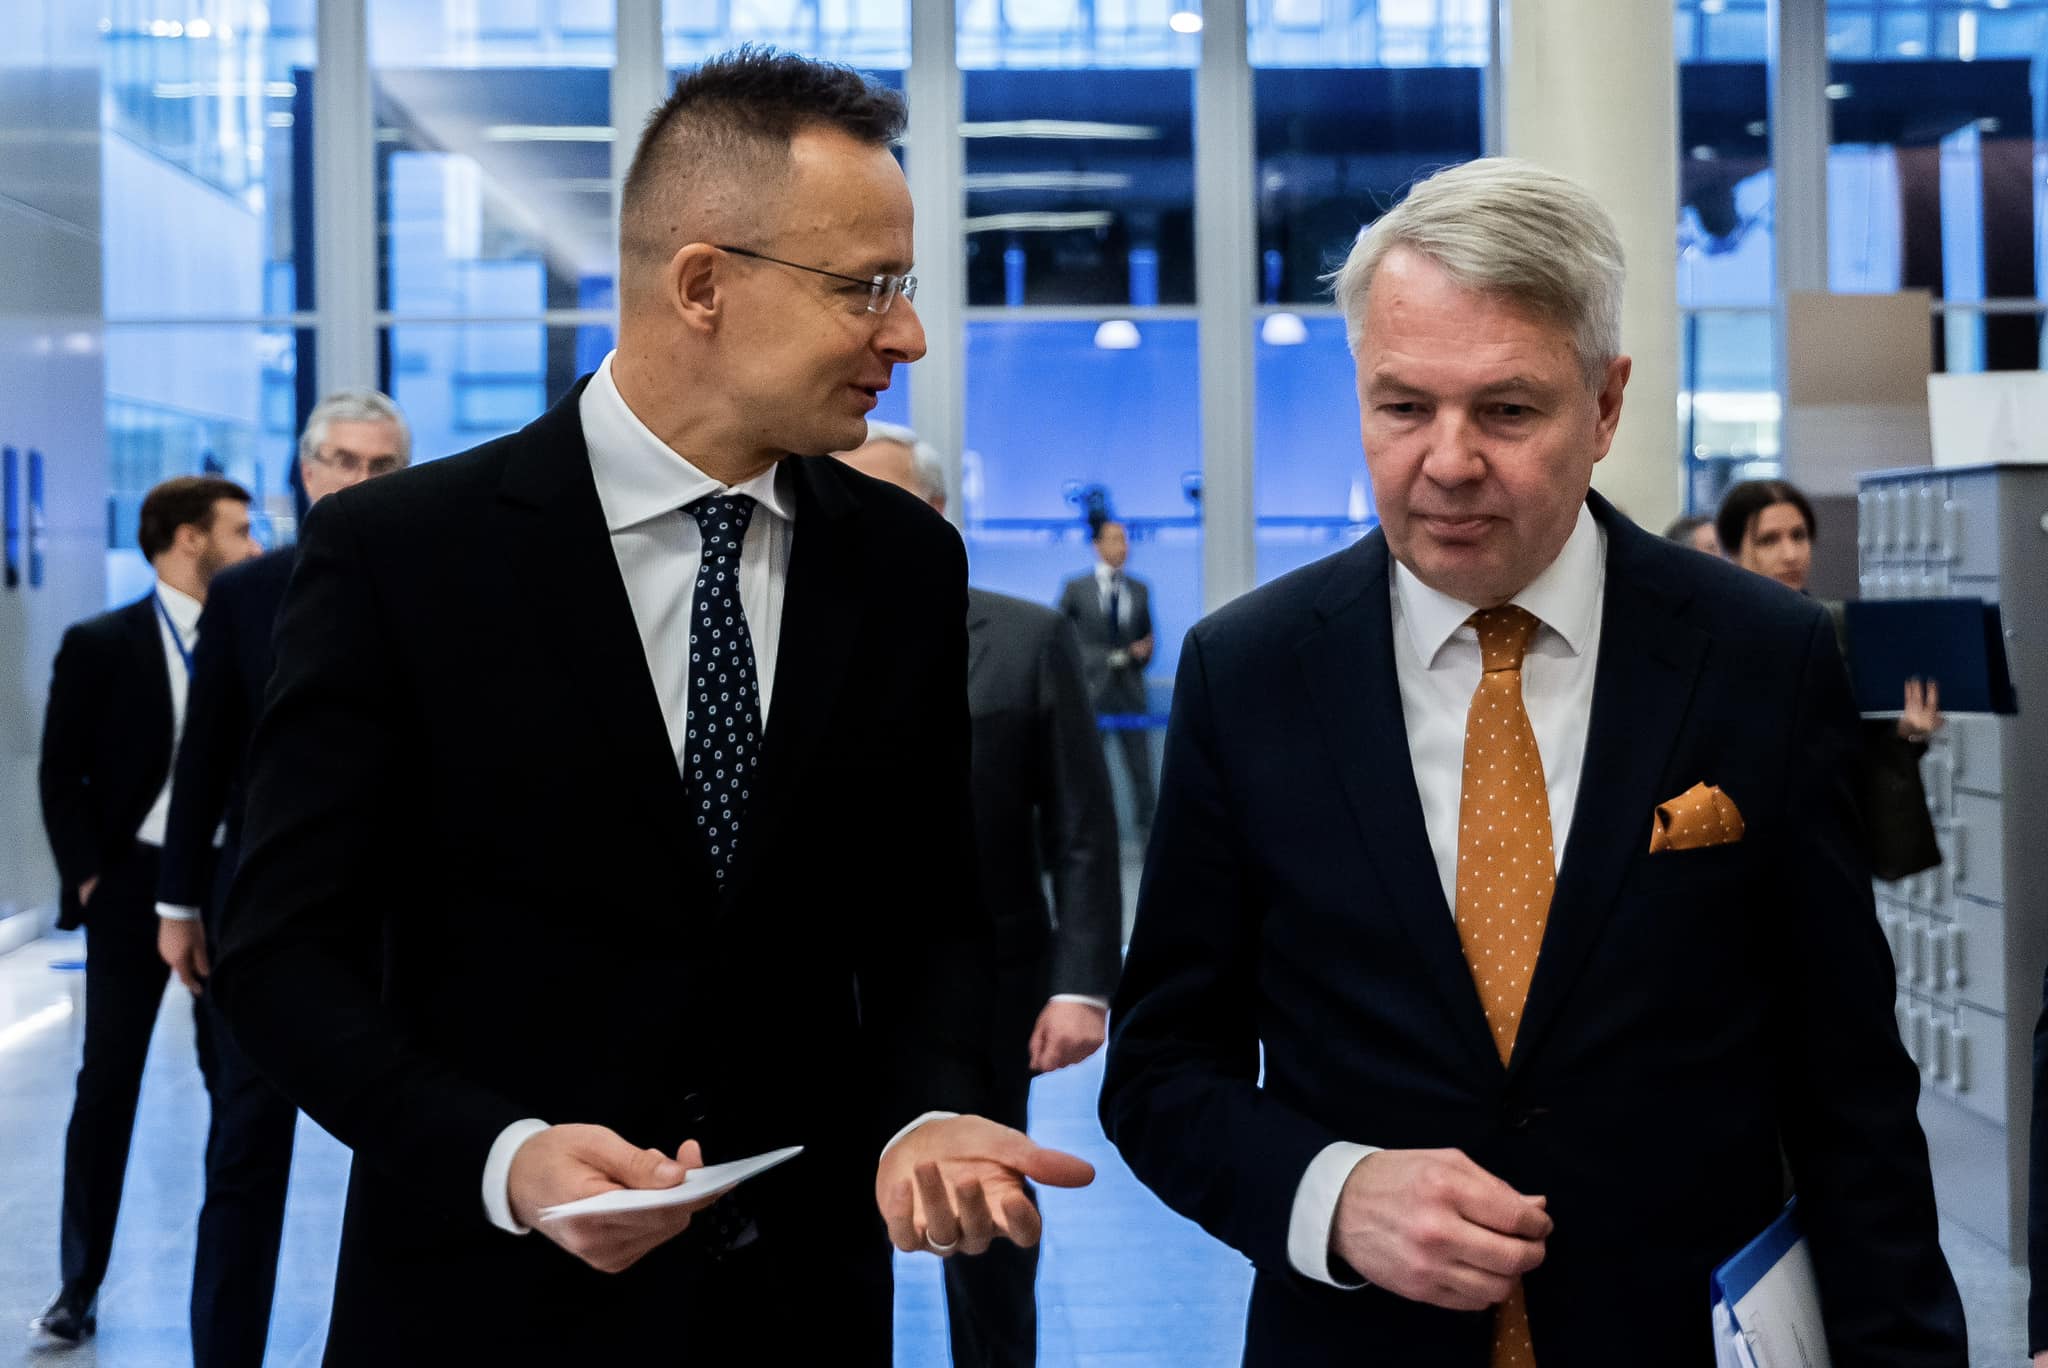 Finland's FM Thanks Hungary for NATO Accession Ratification